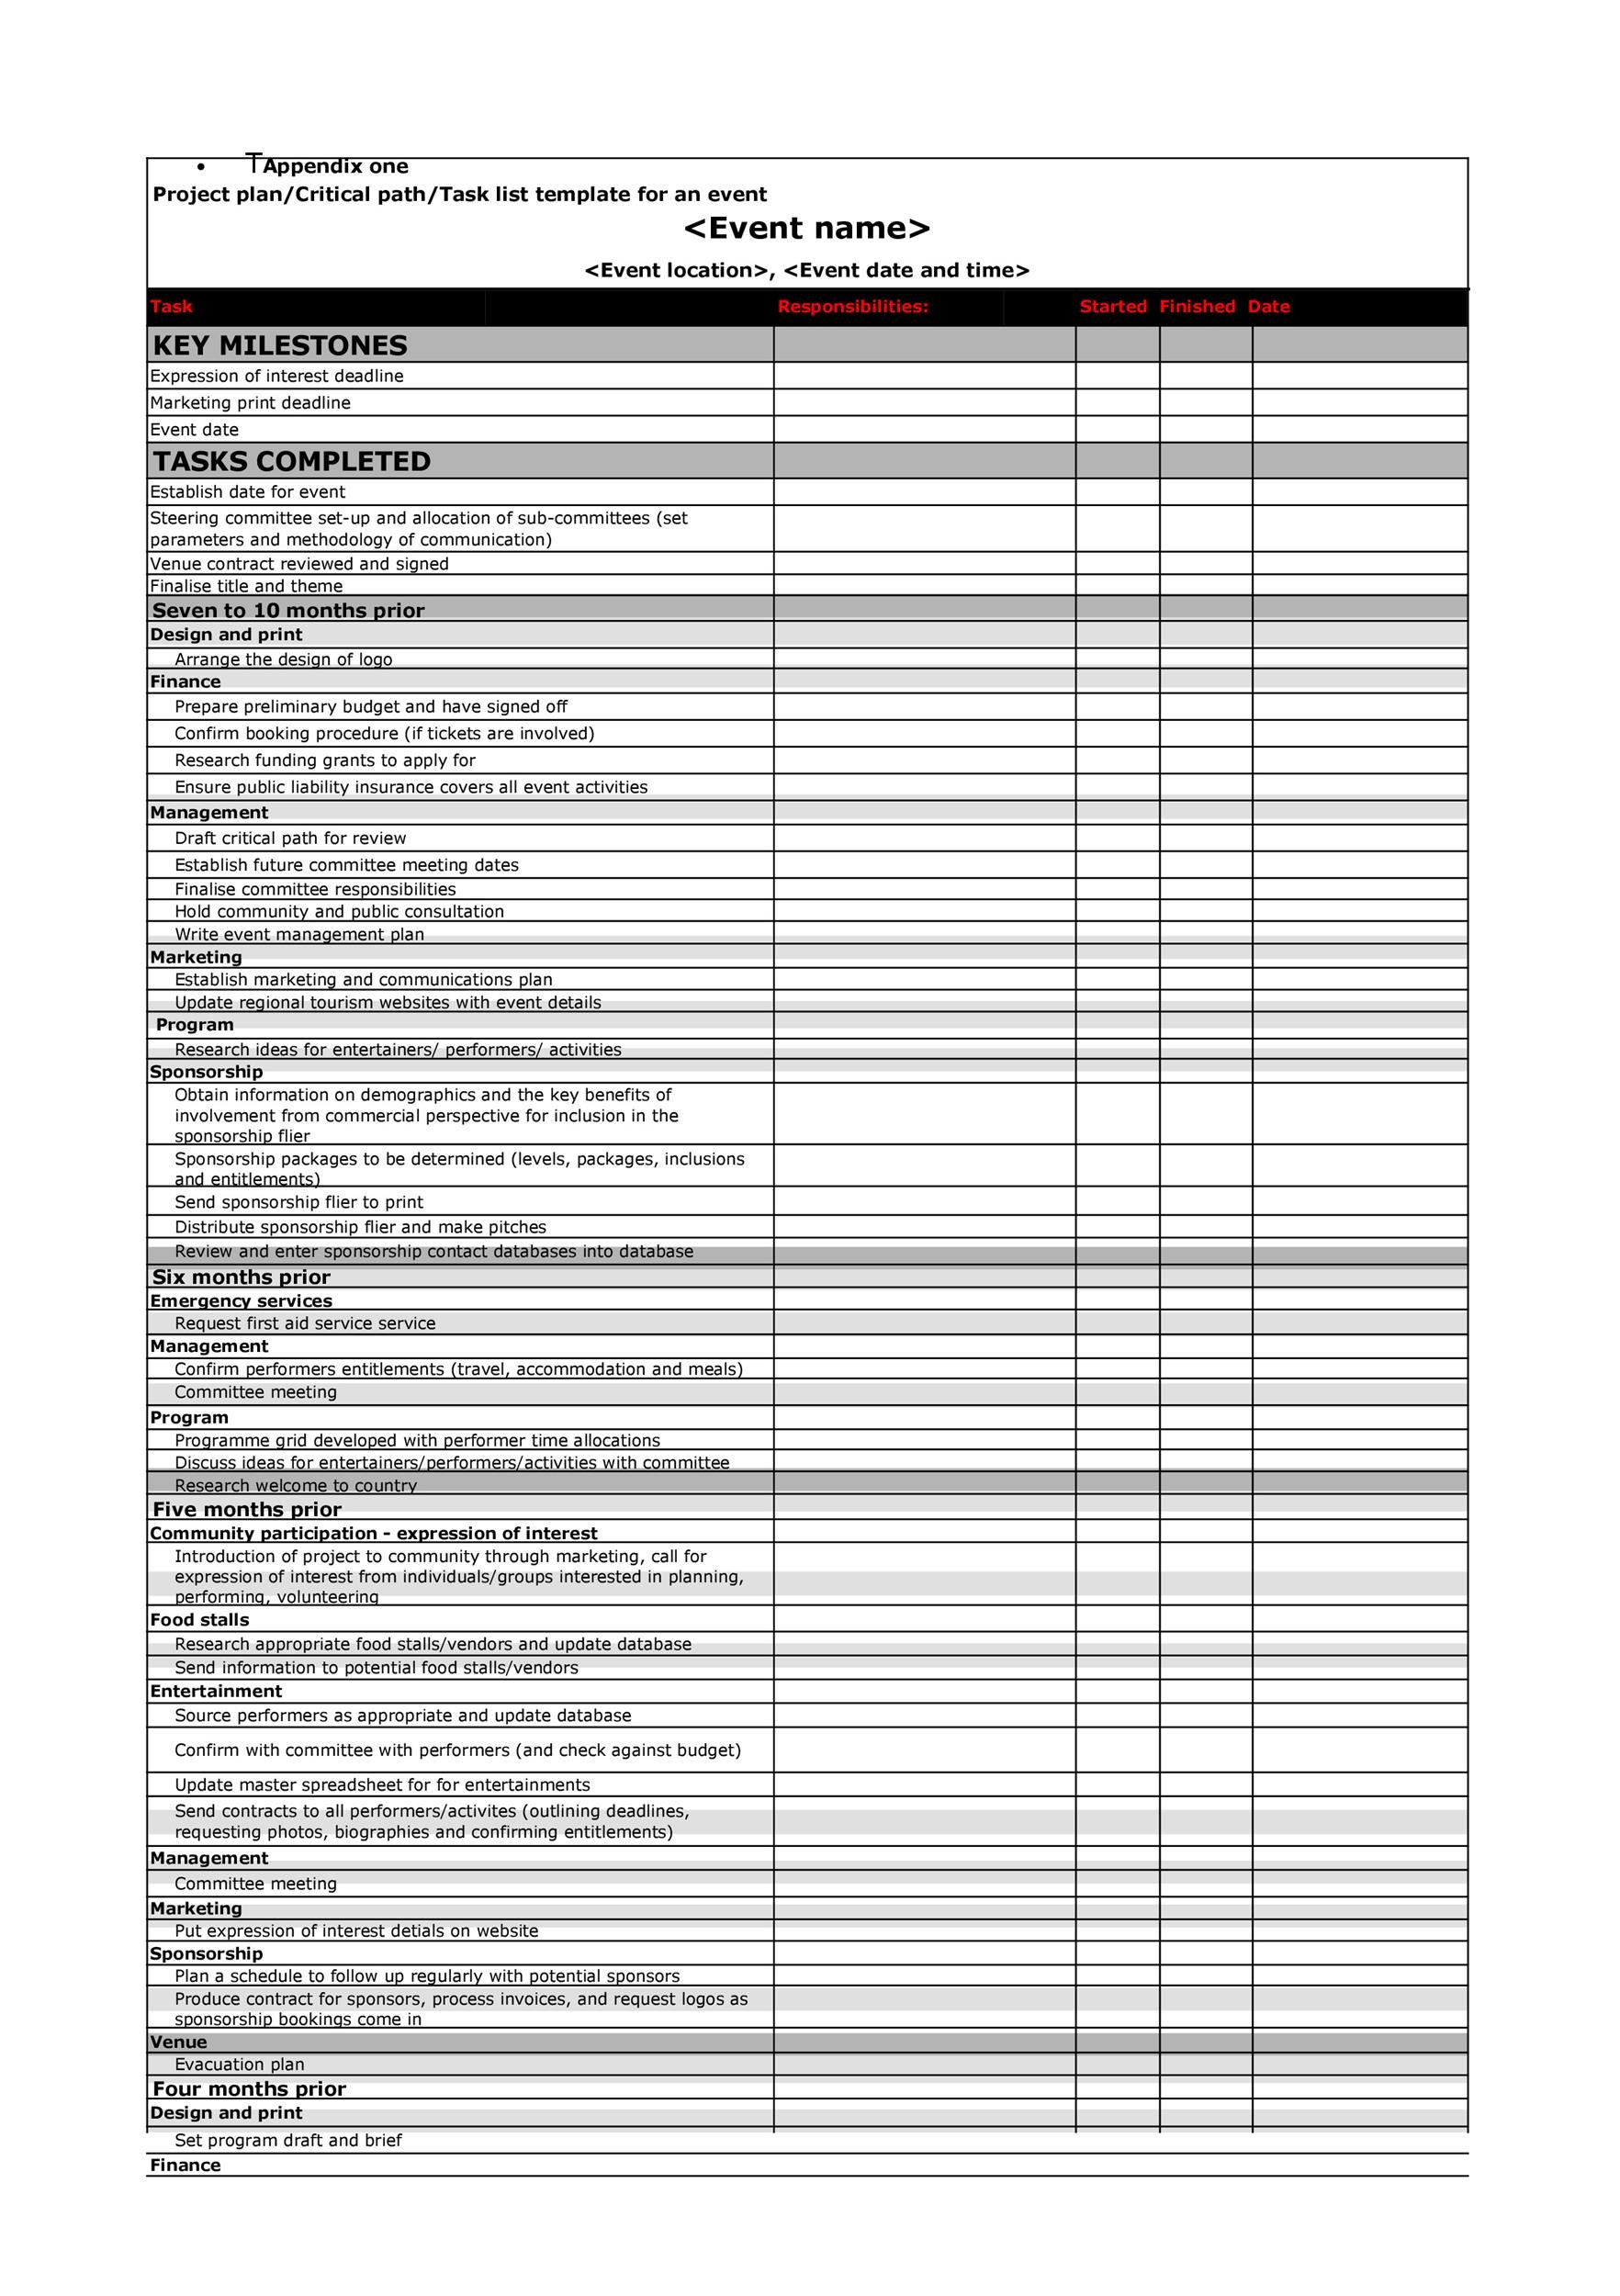 10 Professional Event Planning Checklist Templates ᐅ TemplateLab Throughout Festival Planning Checklist Template Intended For Festival Planning Checklist Template